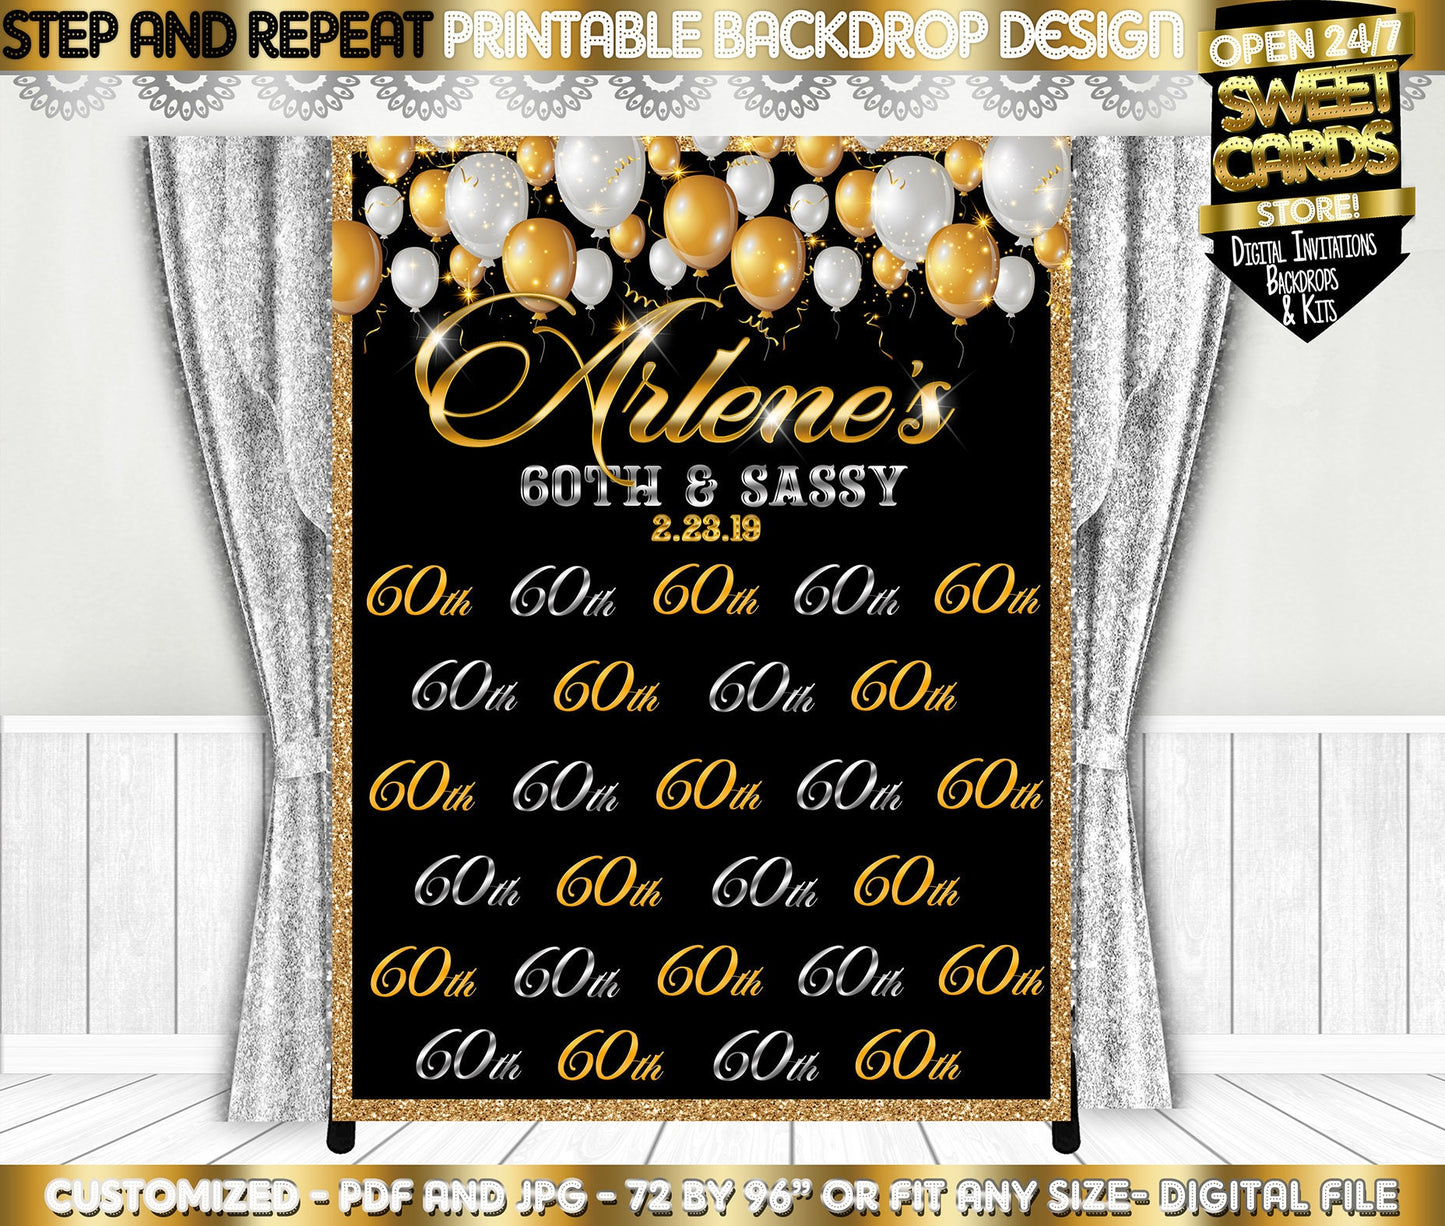 60th Birthday Step and Repeat Printable party backdrop, Gold silver Black Backdrop, 60th 50th 40th Birthday step and repeat backdrop decor